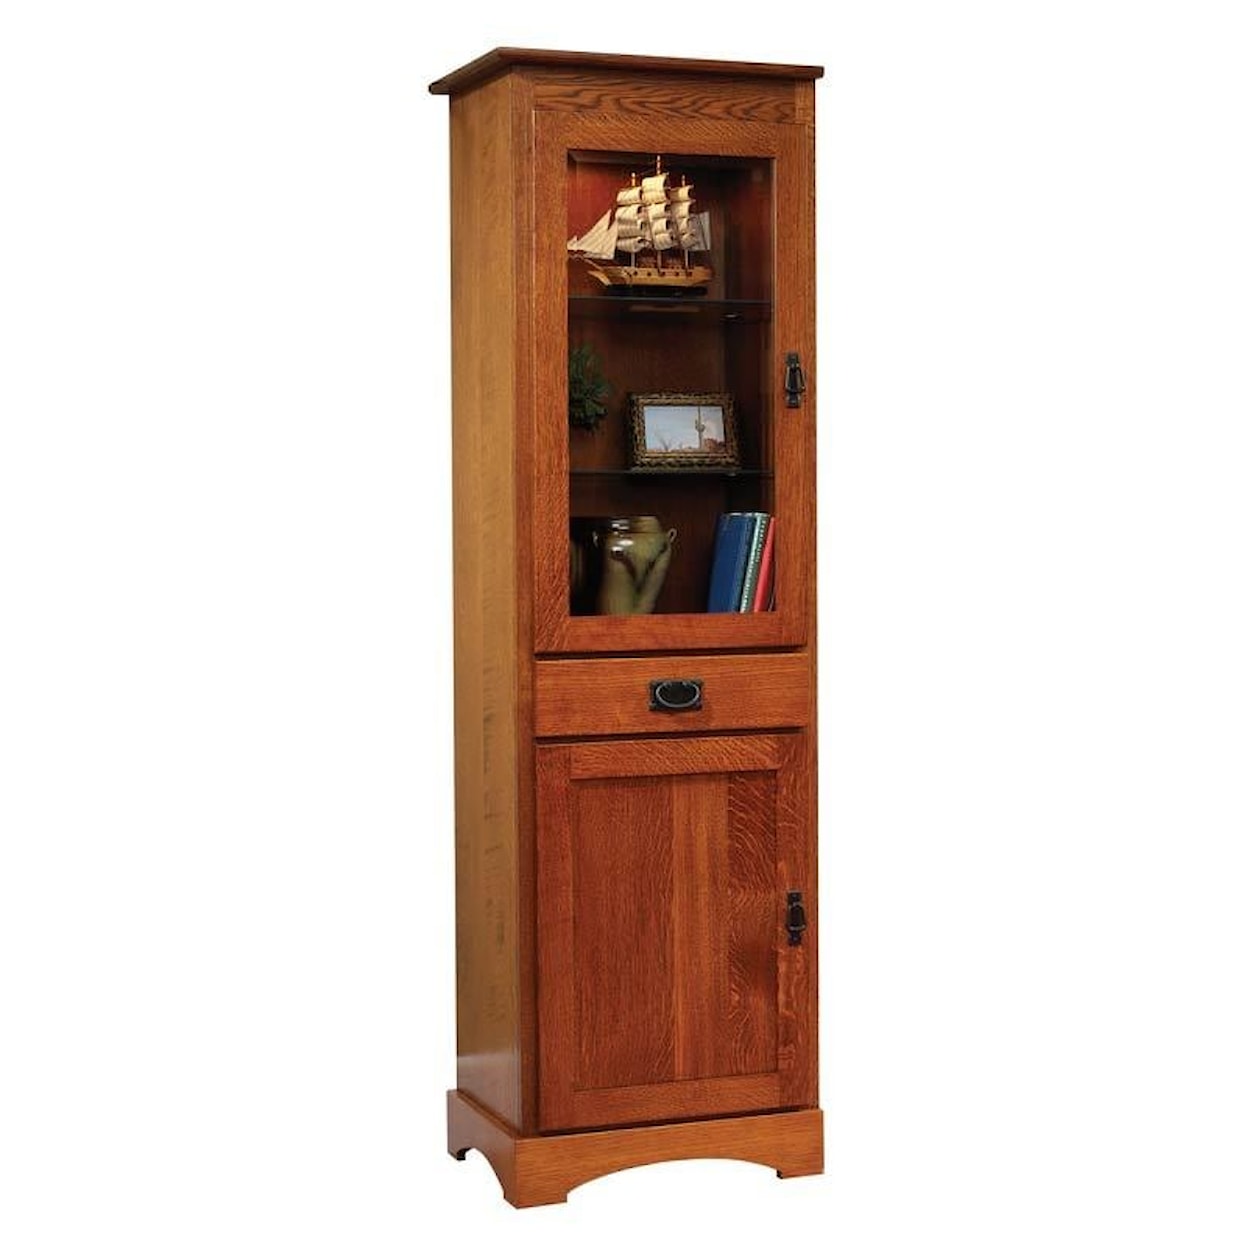 Millcraft Murphy Bed English Mission 23” Bookcase